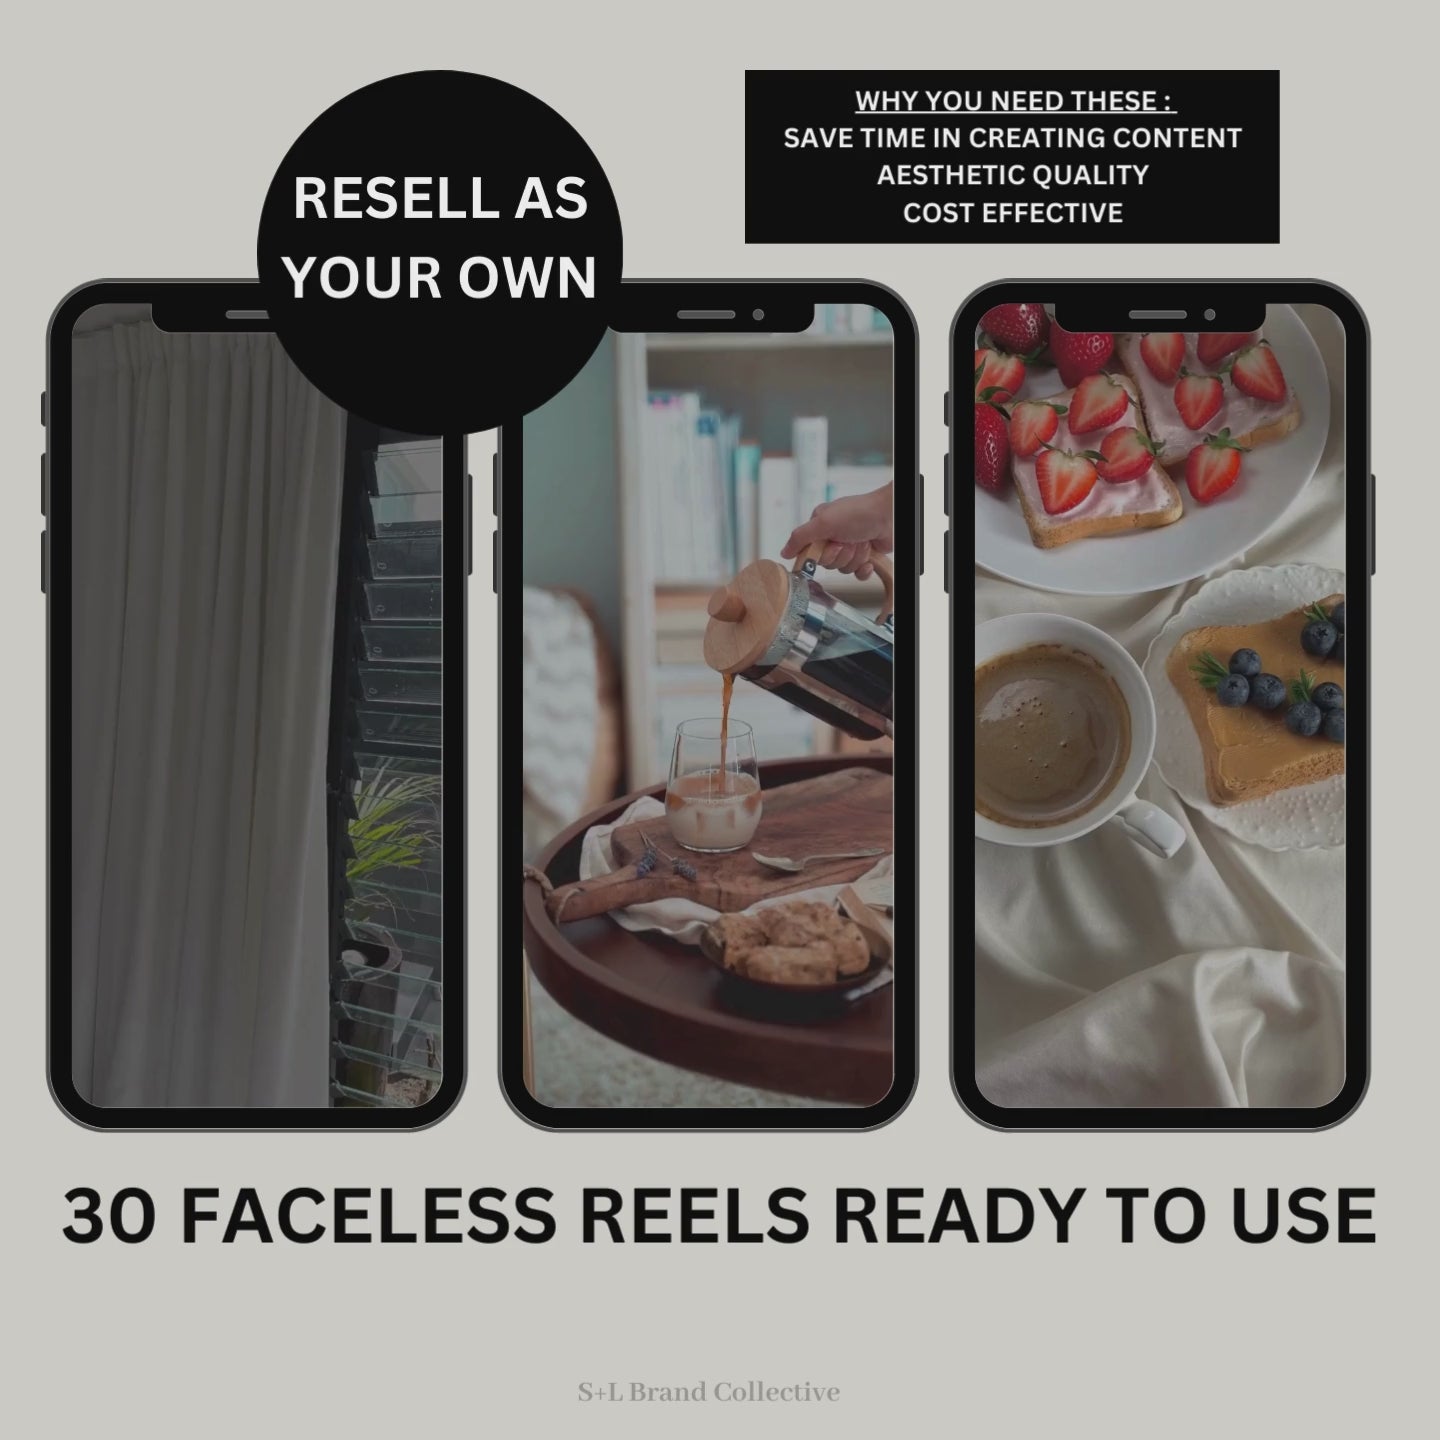 Elevate Your Presence with Faceless Reels